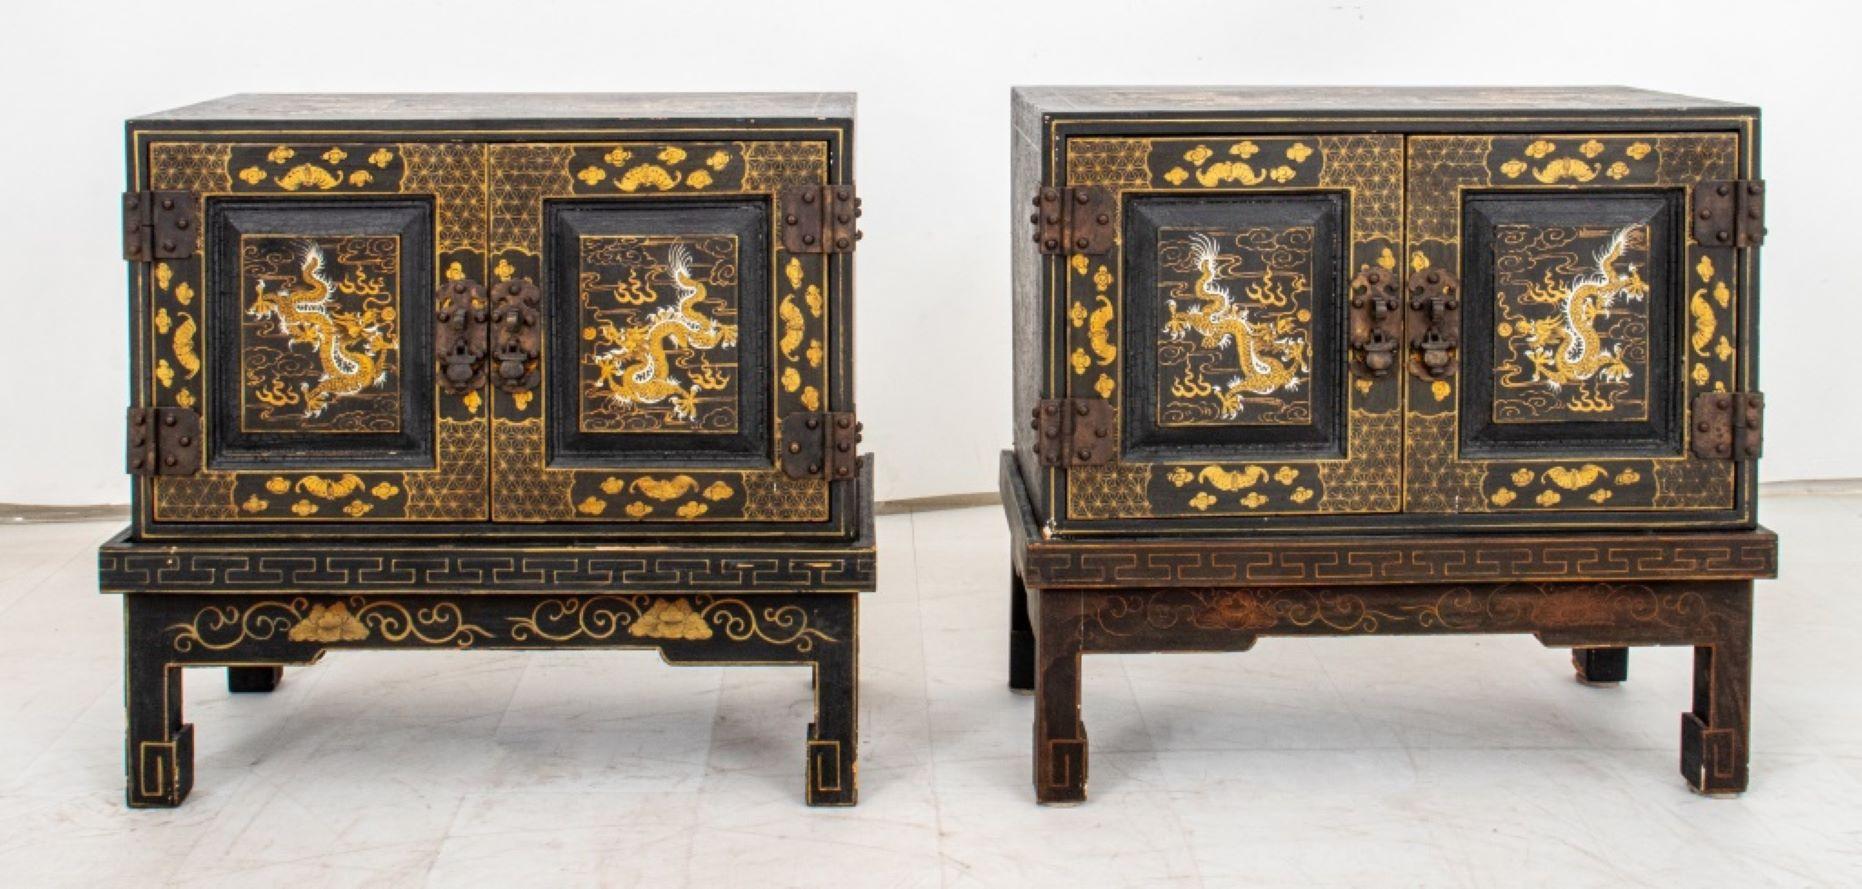 Pair of Chinoiserie Black and Gilt-Decorated Cabinets on Stands, each with images of dragons and auspicious objects in gold, rectangular and each with two doors. 21